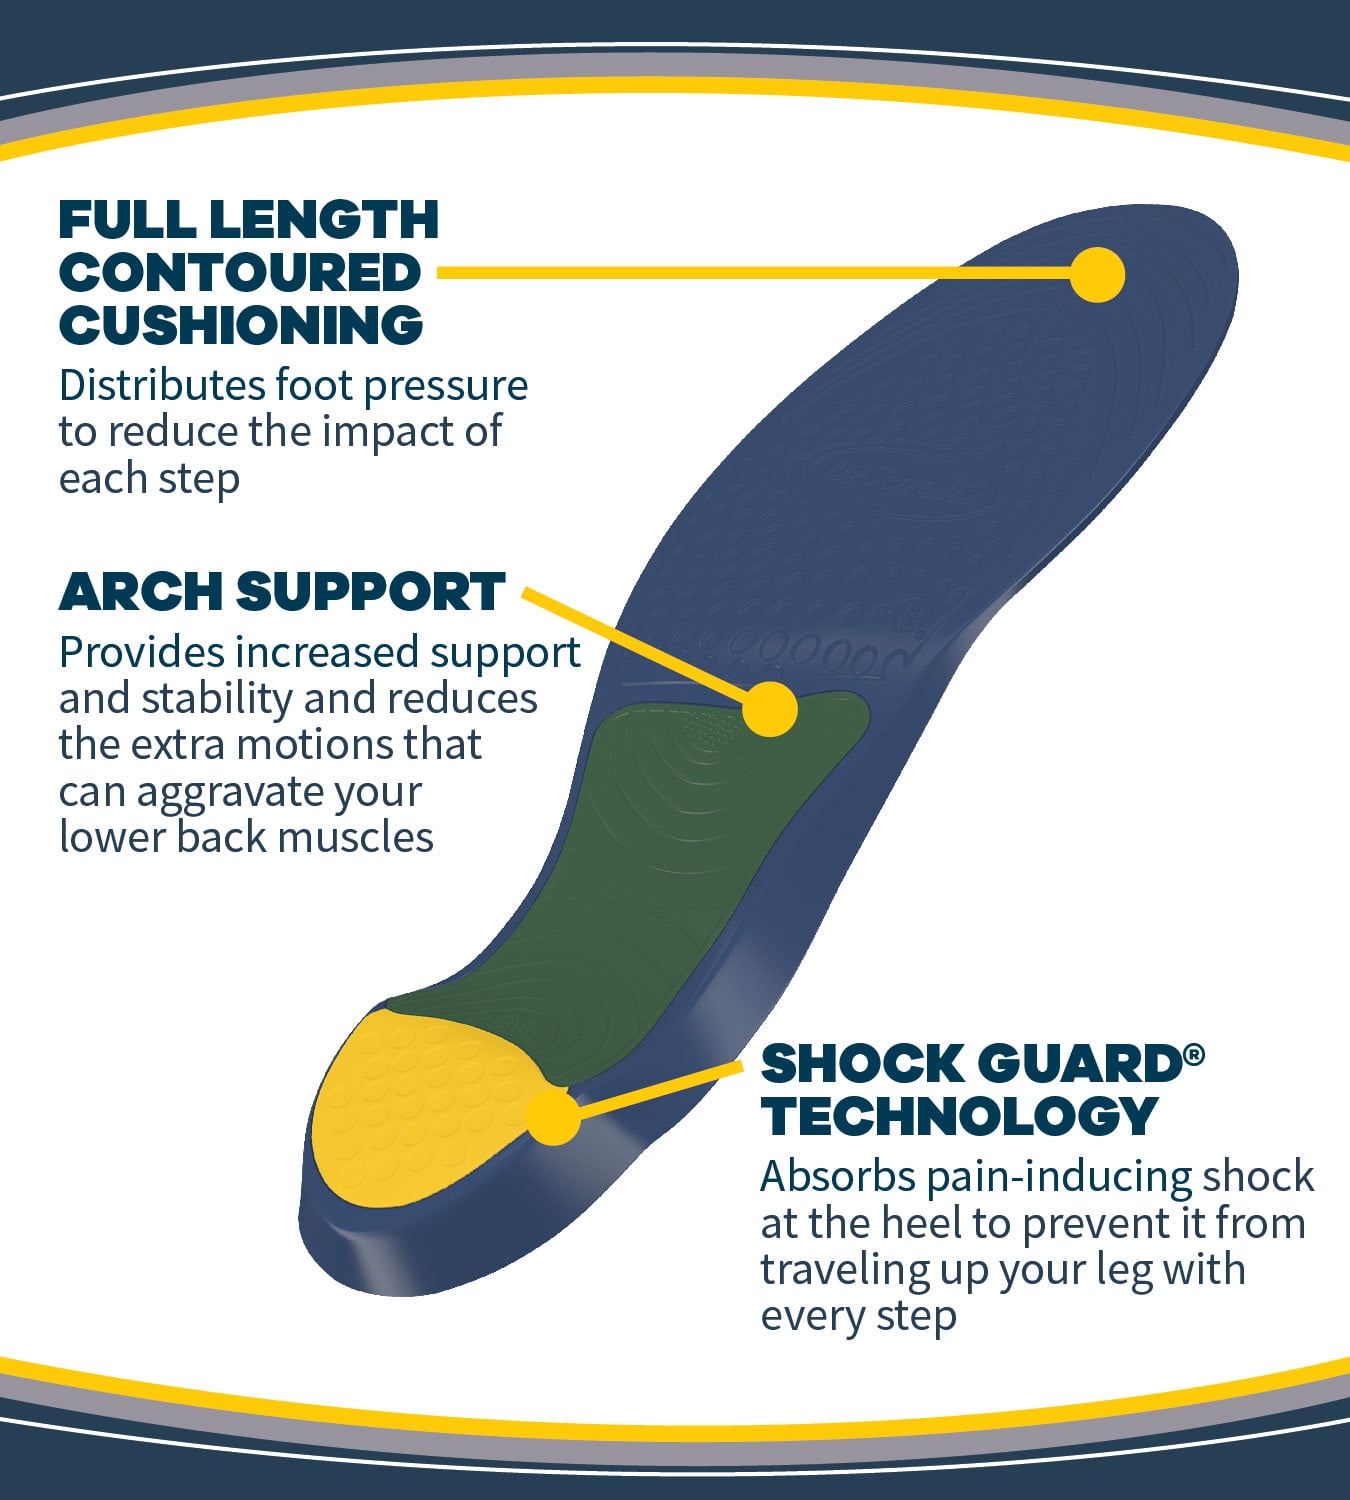 dr scholl's orthotics for lower back pain